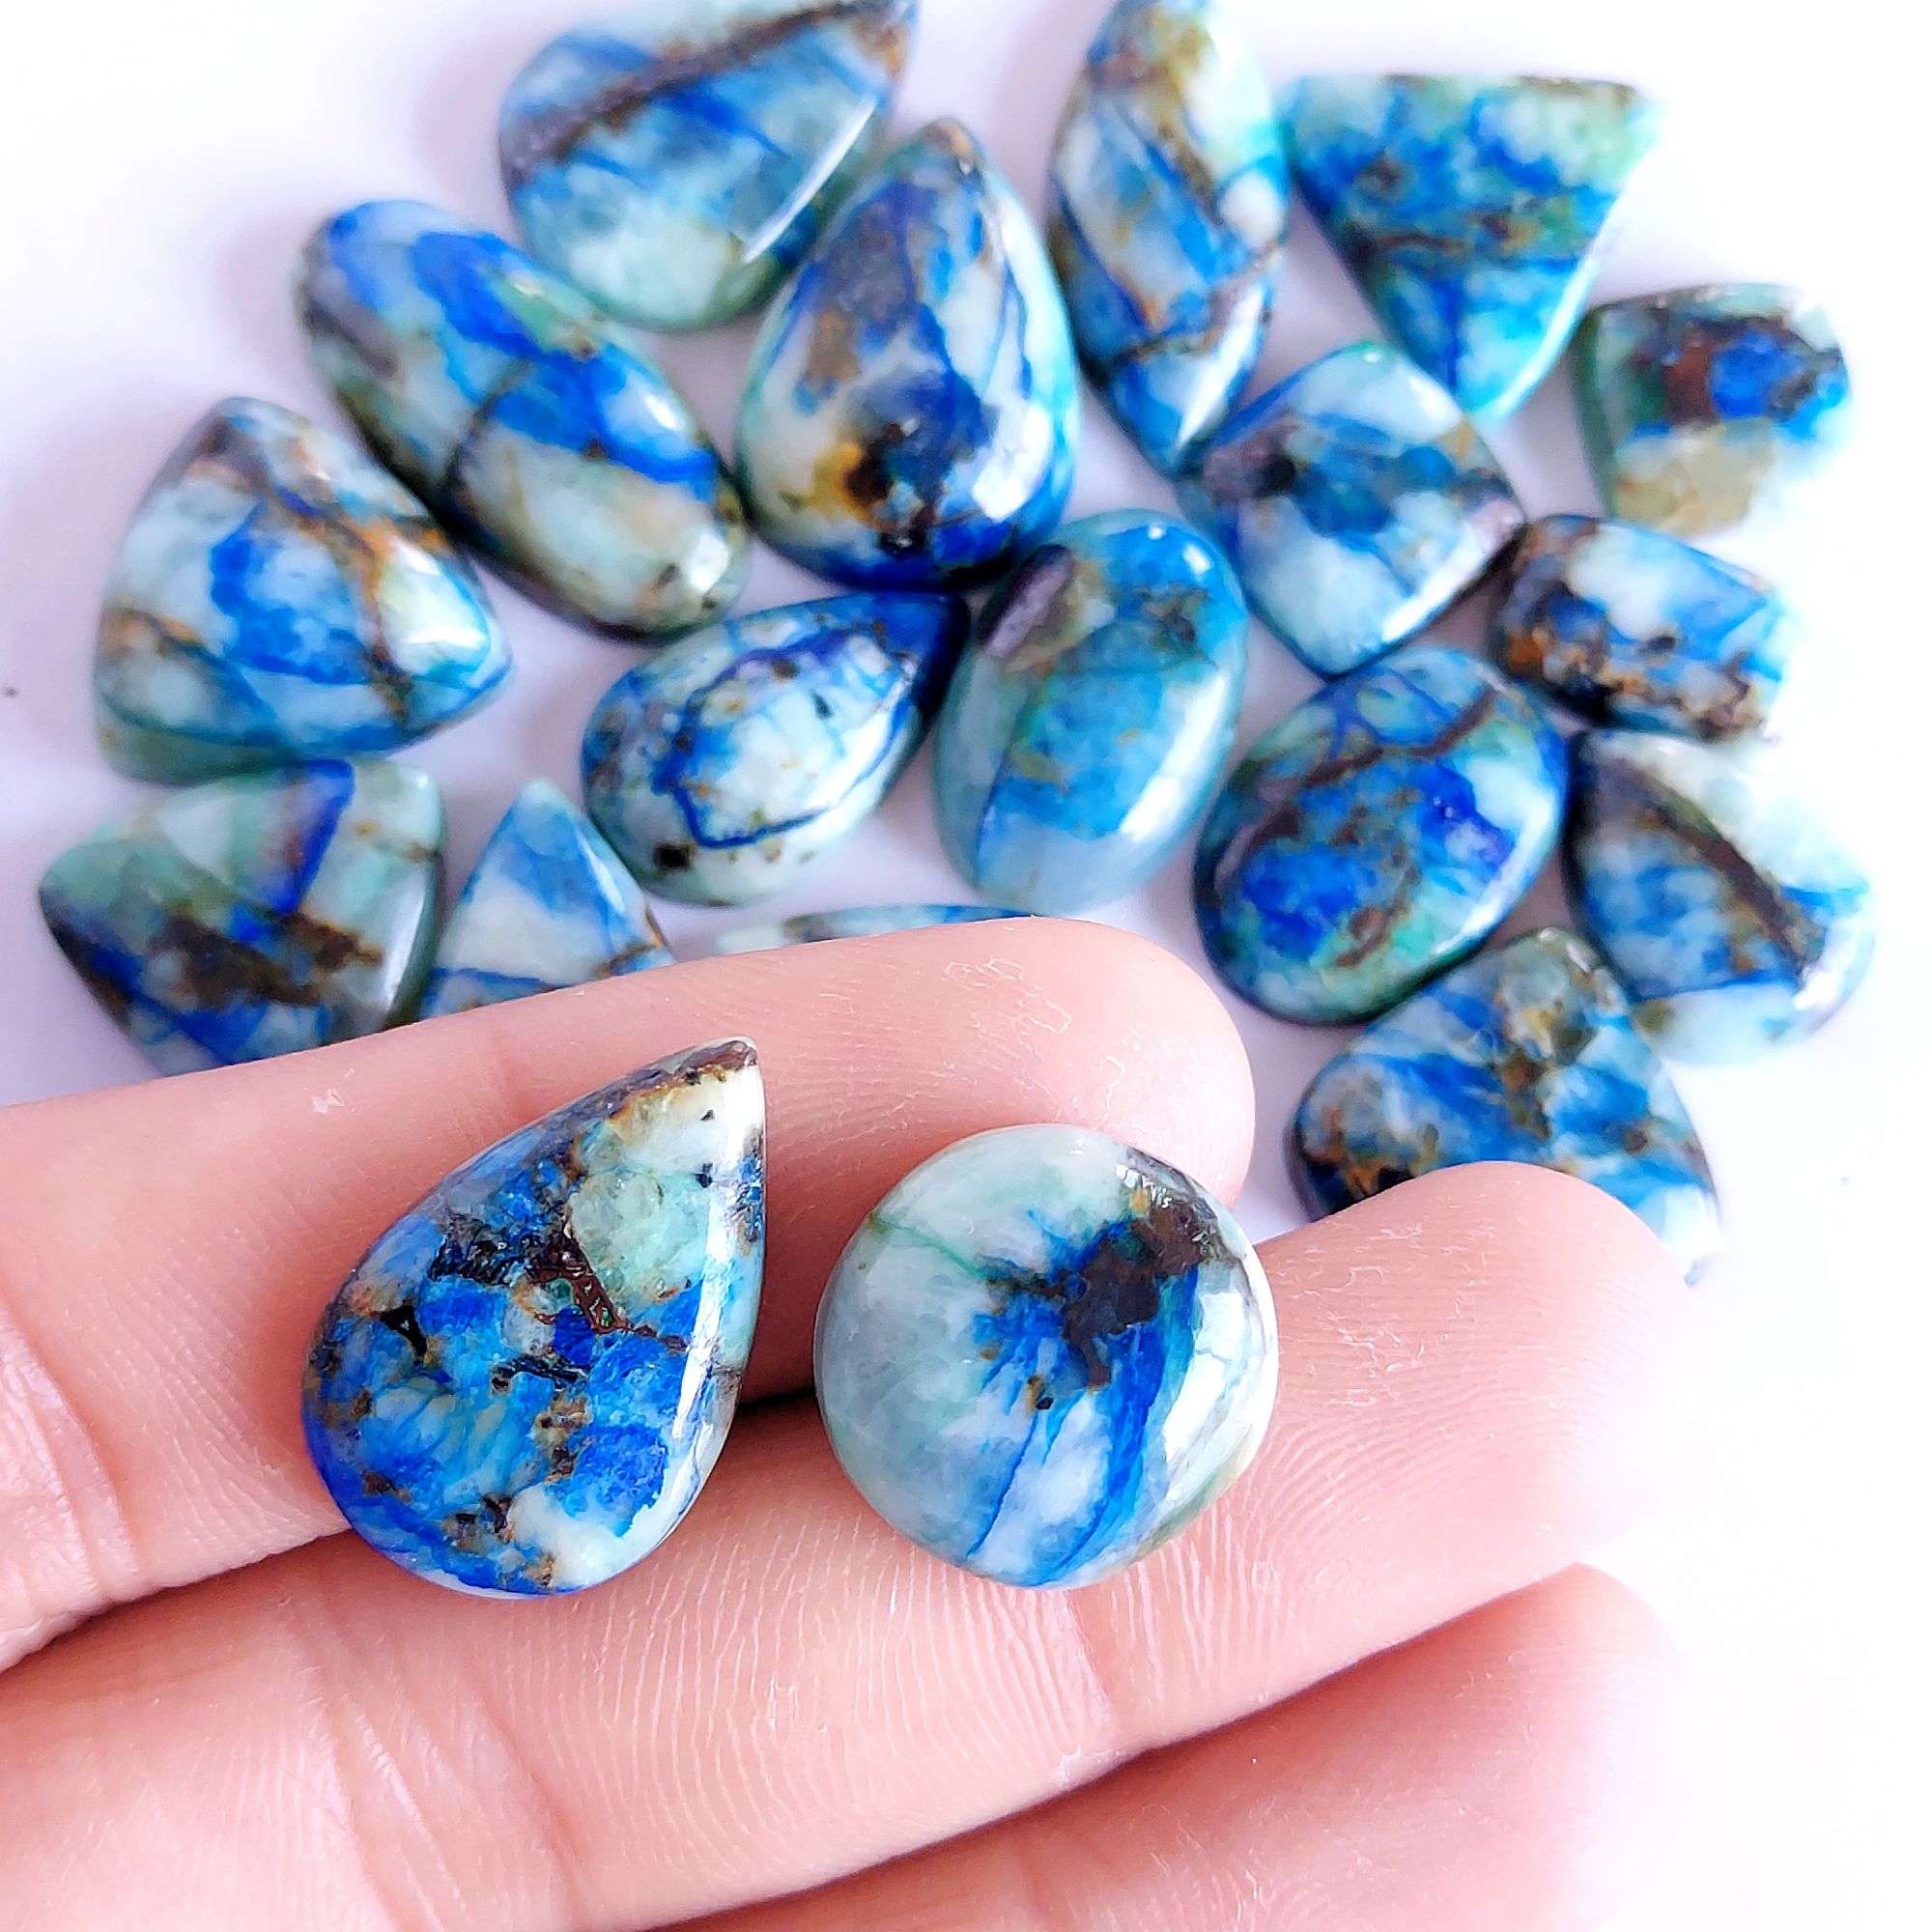 256.Cts 19 Pcs Natural Smooth Azurite Mix Loose Gemstone Cabochon Lot Size 26x12 14x14mm Wholesale Gemstone For jewelry